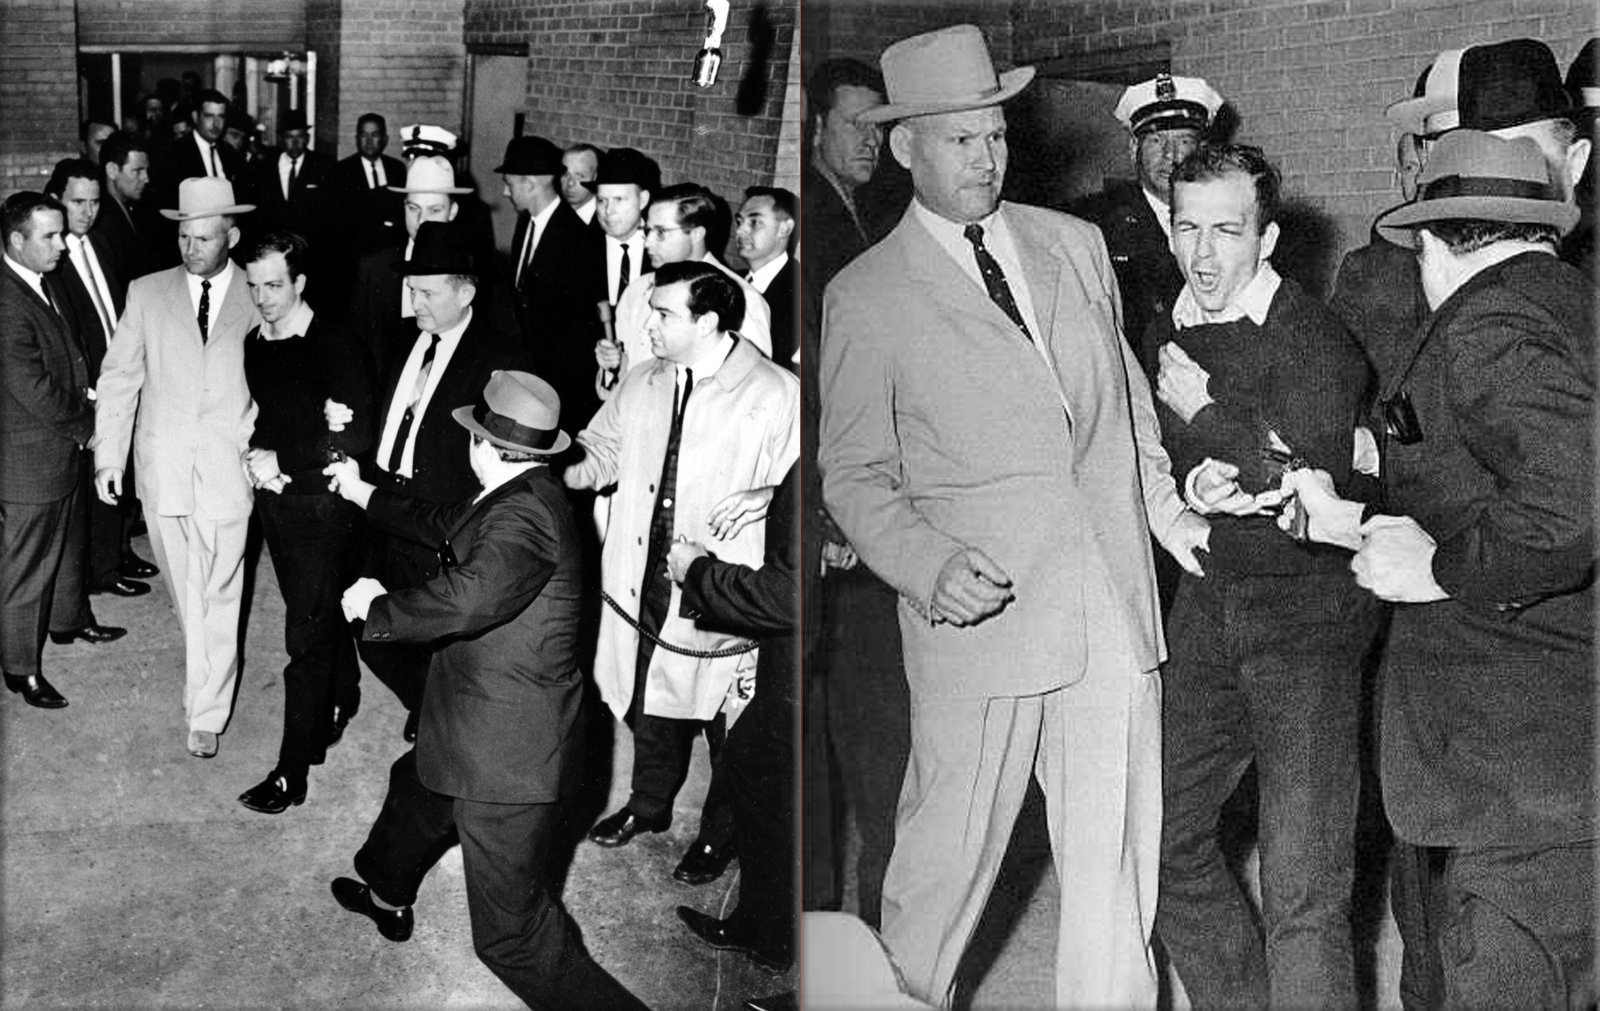 Lee Harvey Oswald is murdered by Jack Ruby in the basement of Dallas police department headquarter